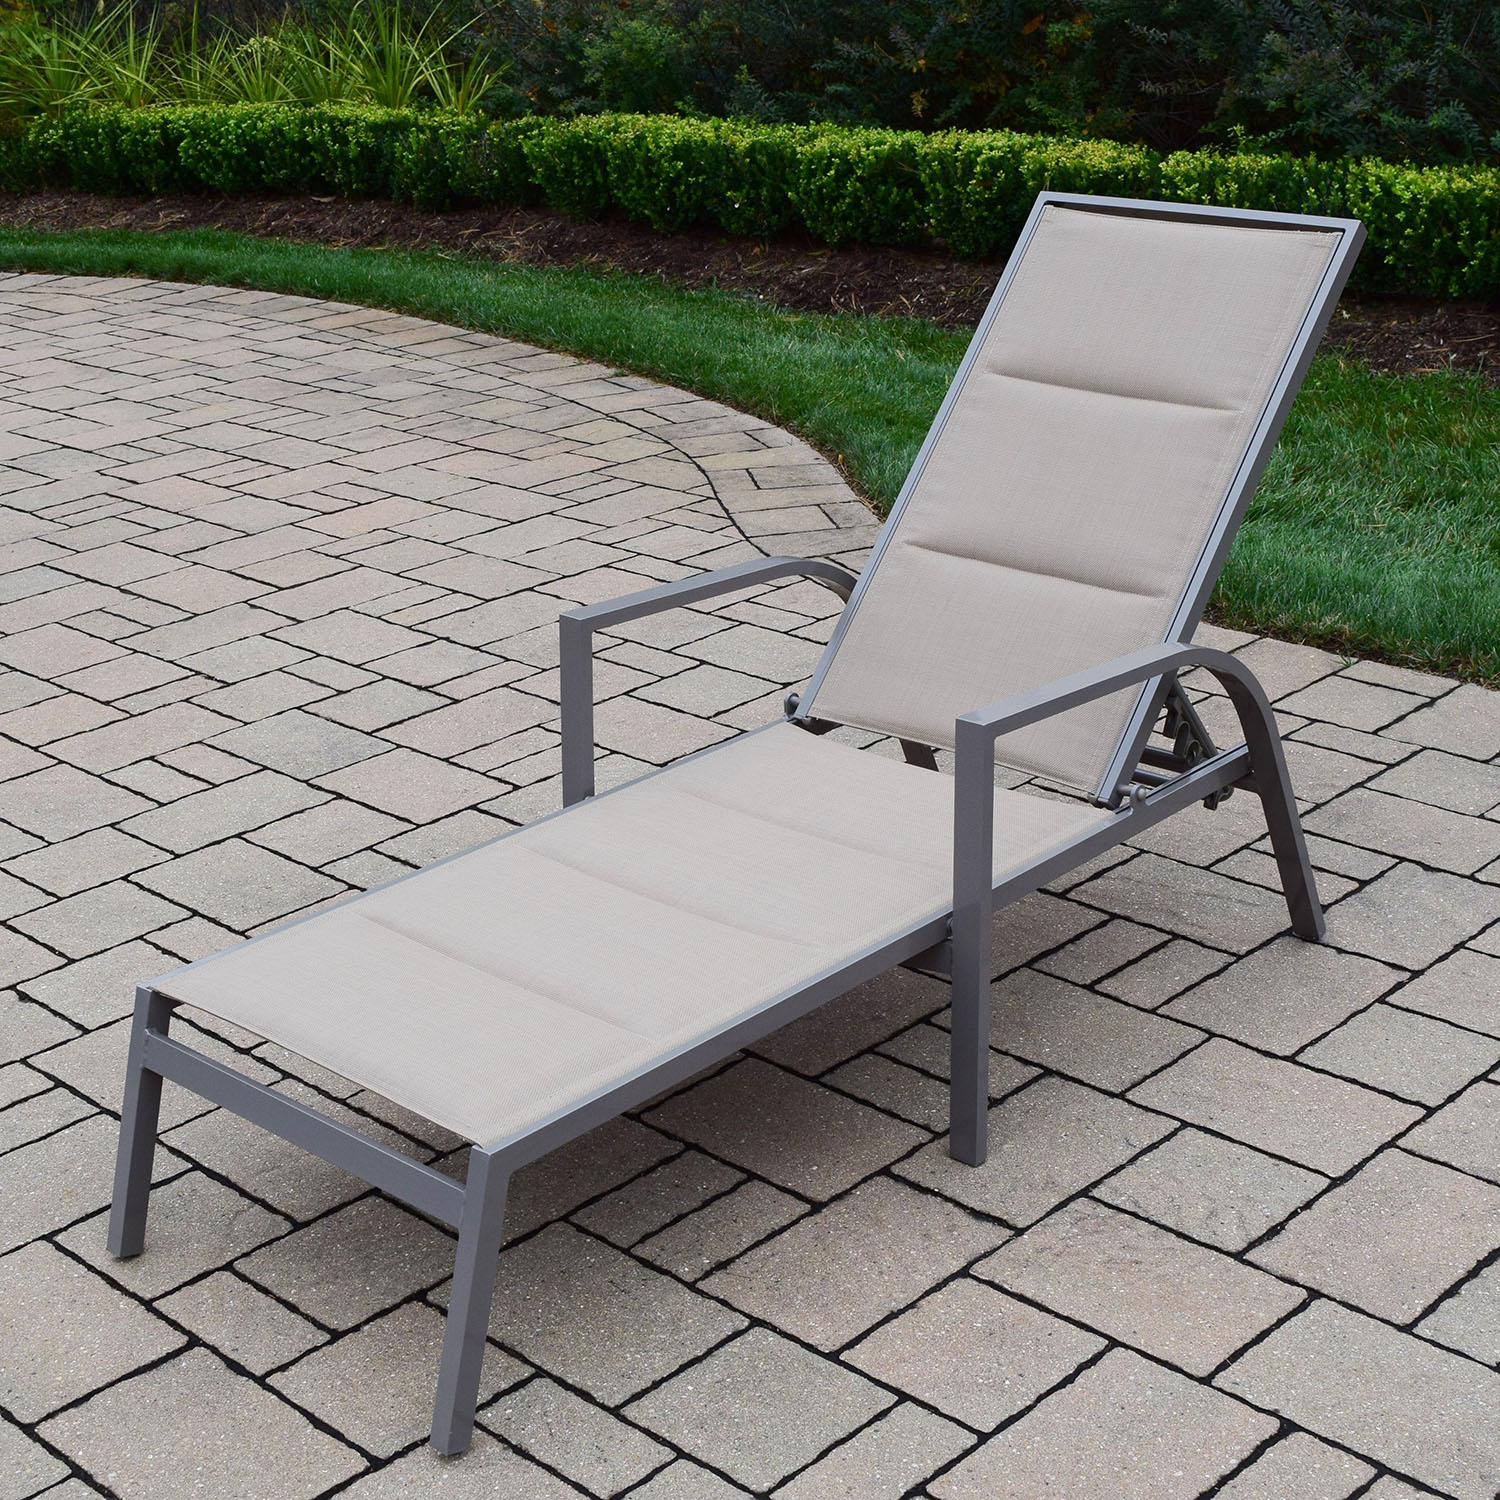 Padded Sling Aluminum Chaise Lounge Chair